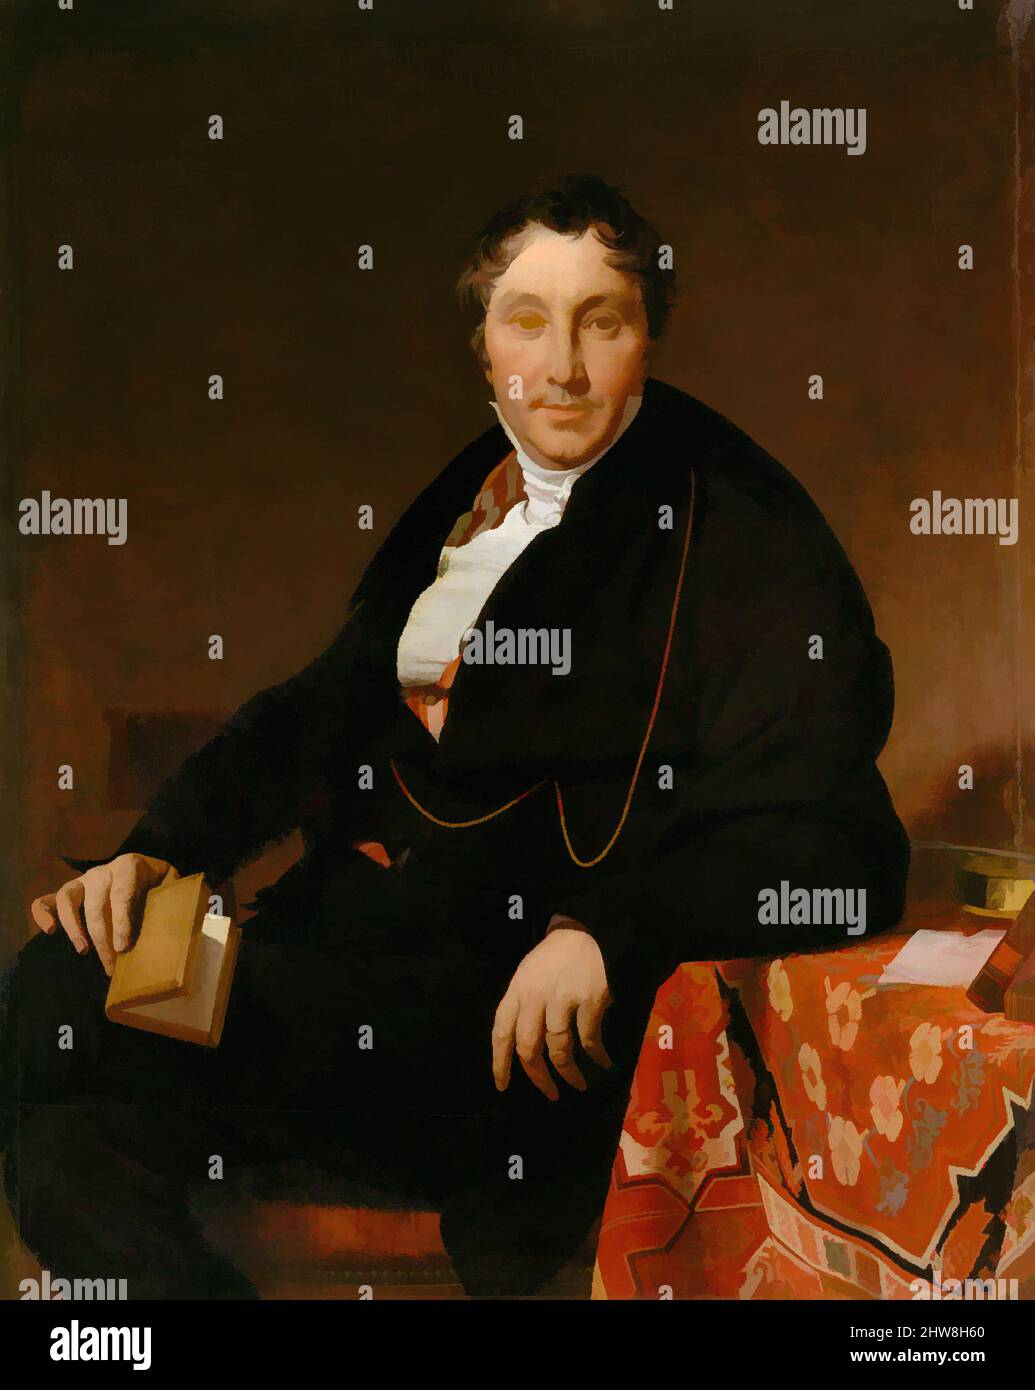 Art inspired by Jacques-Louis Leblanc (1774–1846), 1823, Oil on canvas, 47 5/8 x 37 5/8 in. (121 x 95.6 cm), Paintings, Jean Auguste Dominique Ingres (French, Montauban 1780–1867 Paris), This portrait of Leblanc and that of his wife were painted in 1823, shortly after Ingres met the, Classic works modernized by Artotop with a splash of modernity. Shapes, color and value, eye-catching visual impact on art. Emotions through freedom of artworks in a contemporary way. A timeless message pursuing a wildly creative new direction. Artists turning to the digital medium and creating the Artotop NFT Stock Photo